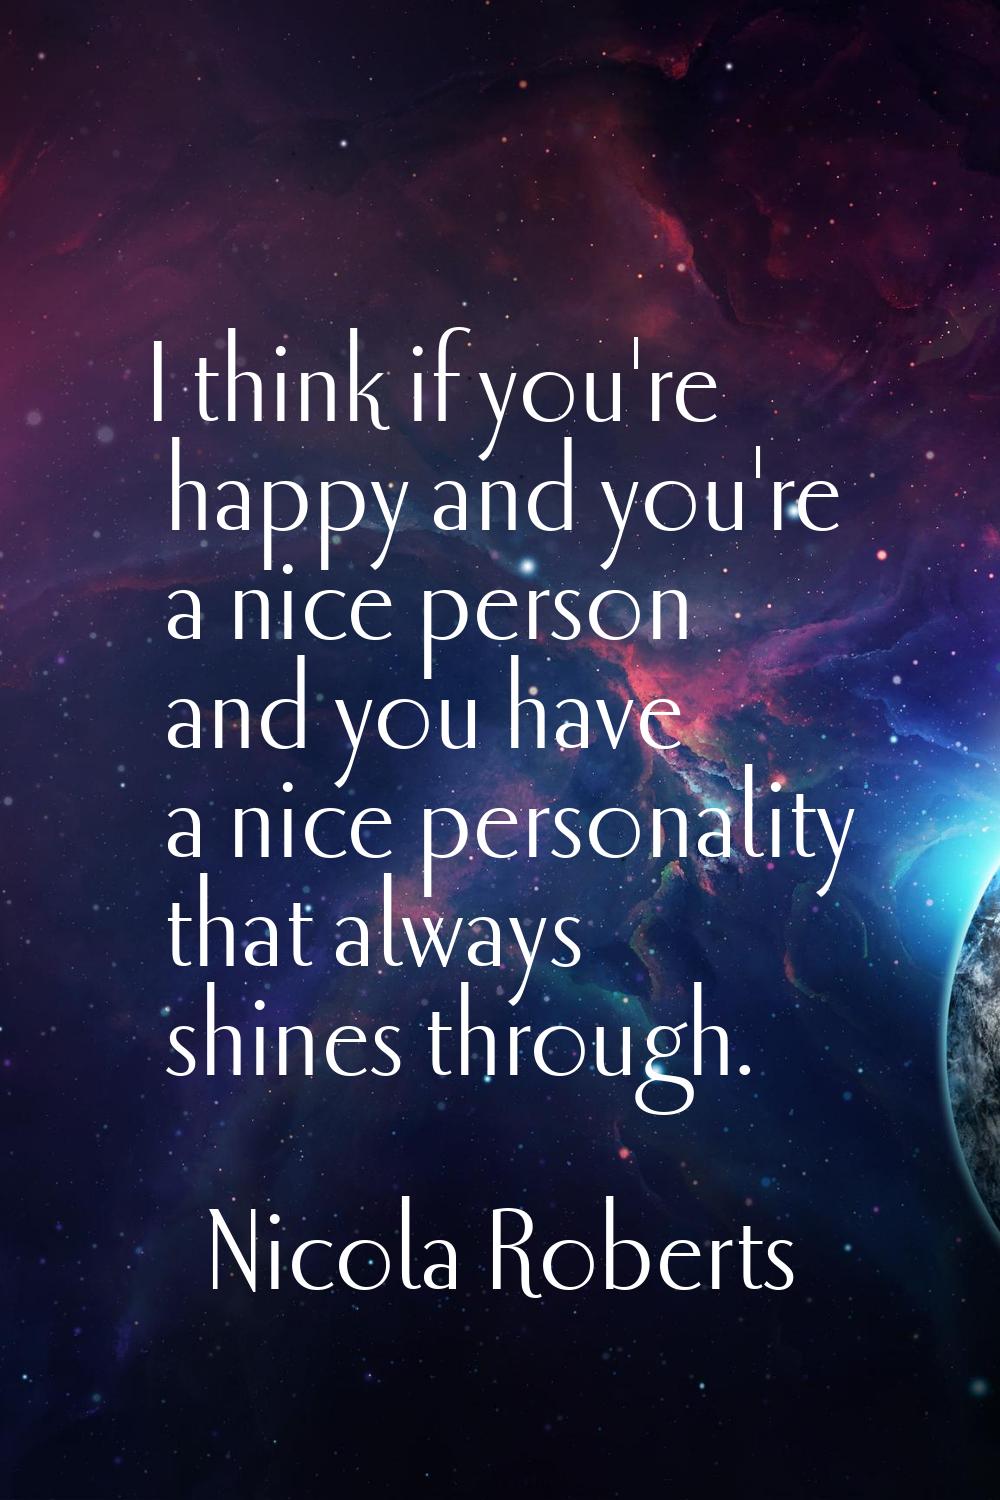 I think if you're happy and you're a nice person and you have a nice personality that always shines